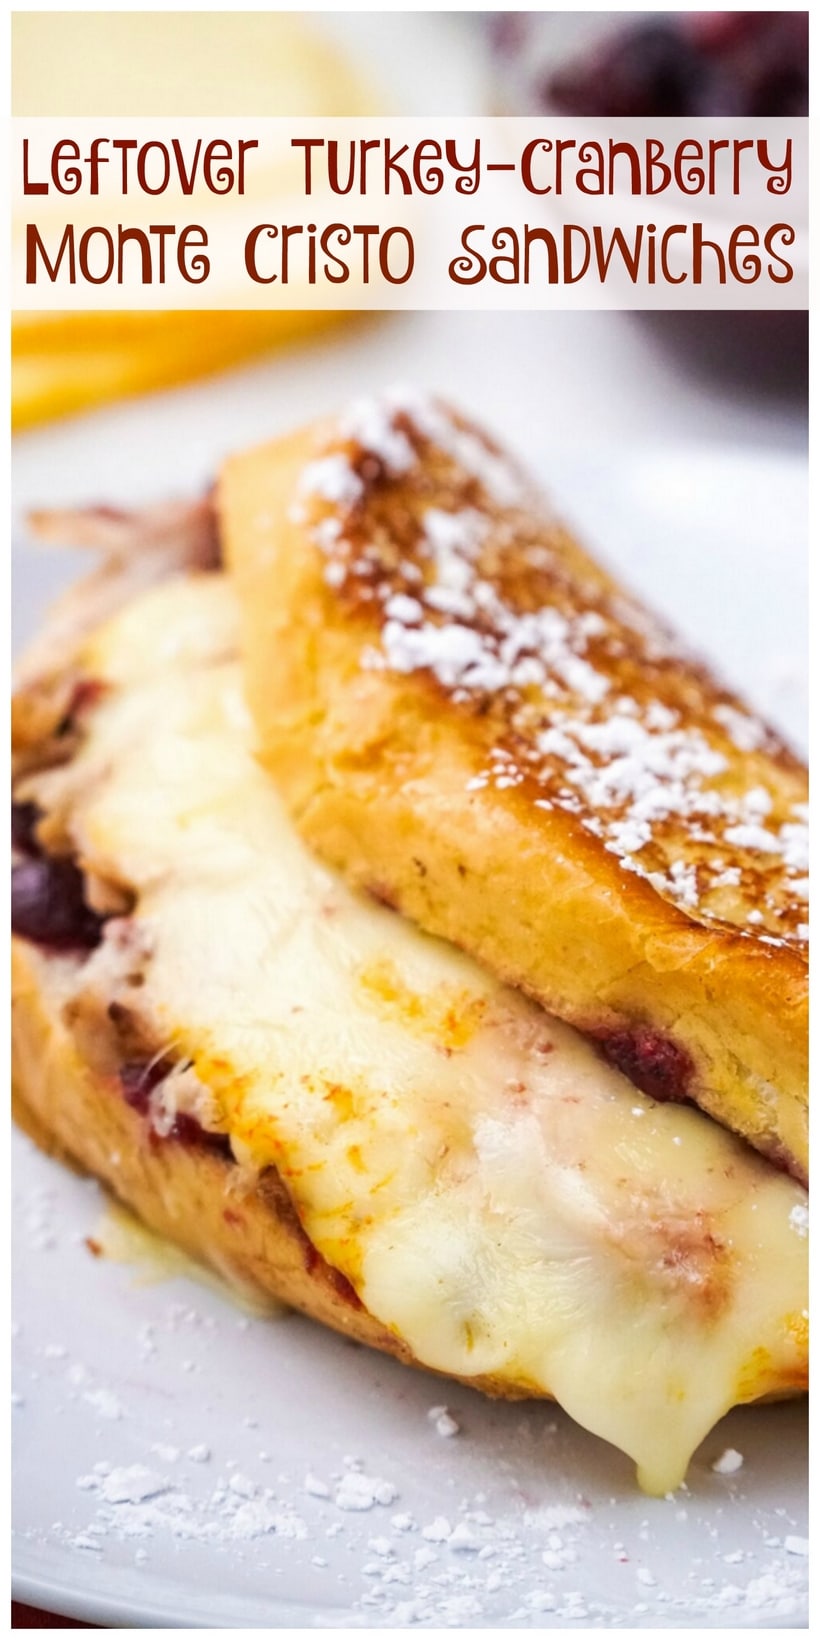 Leftover turkey becomes next-level deliciousness with these Leftover Turkey-Cranberry Monte Cristo Sandwiches. You almost can't wait to get up the next day and make them! #leftoverturkey #noblepig #leftoverturkeyrecipe #montecristo #montecristosandwich #leftovercranberrysauce #cranberry #cranberries #easyleftoverturkeyrecipe #thanksgivingleftovers via @cmpollak1